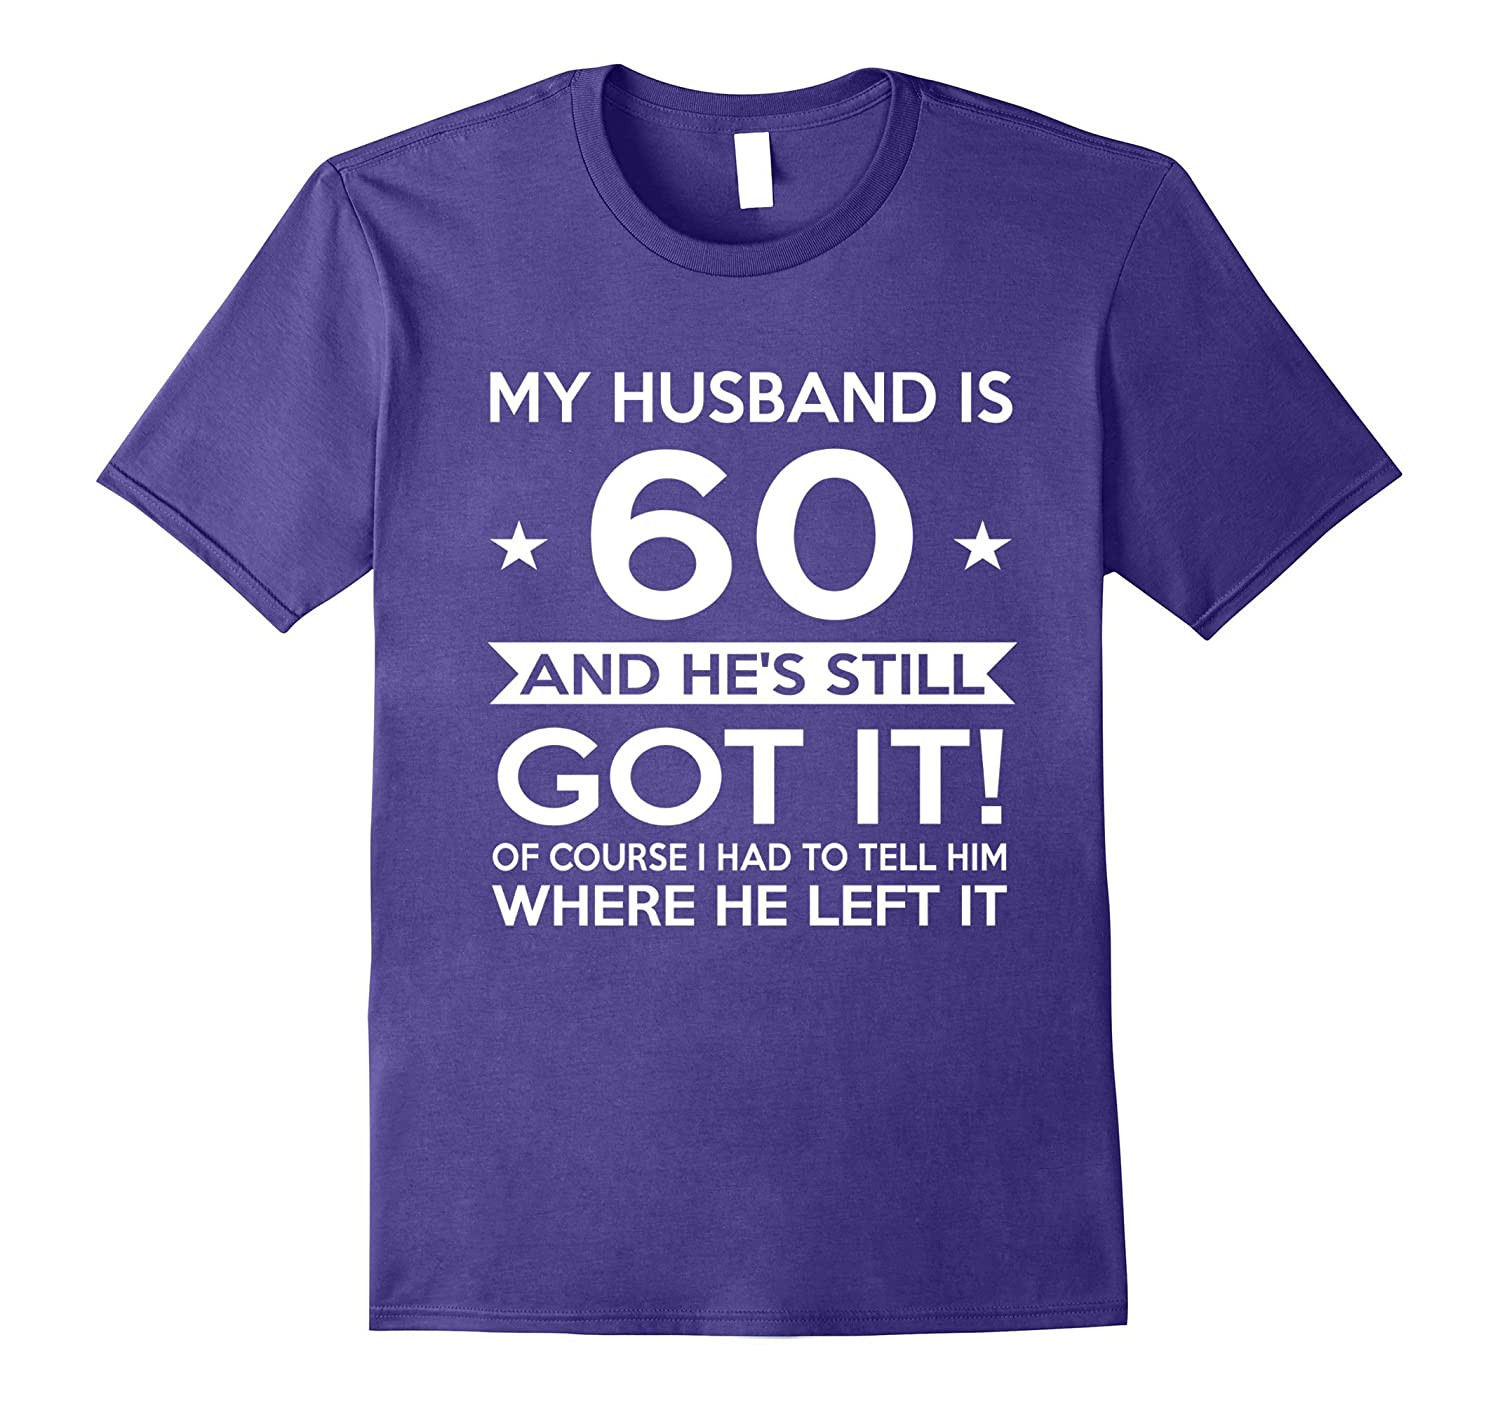 60Th Birthday Gift Ideas For Him
 My Husband is 60 60th Birthday Gift Ideas for him CL